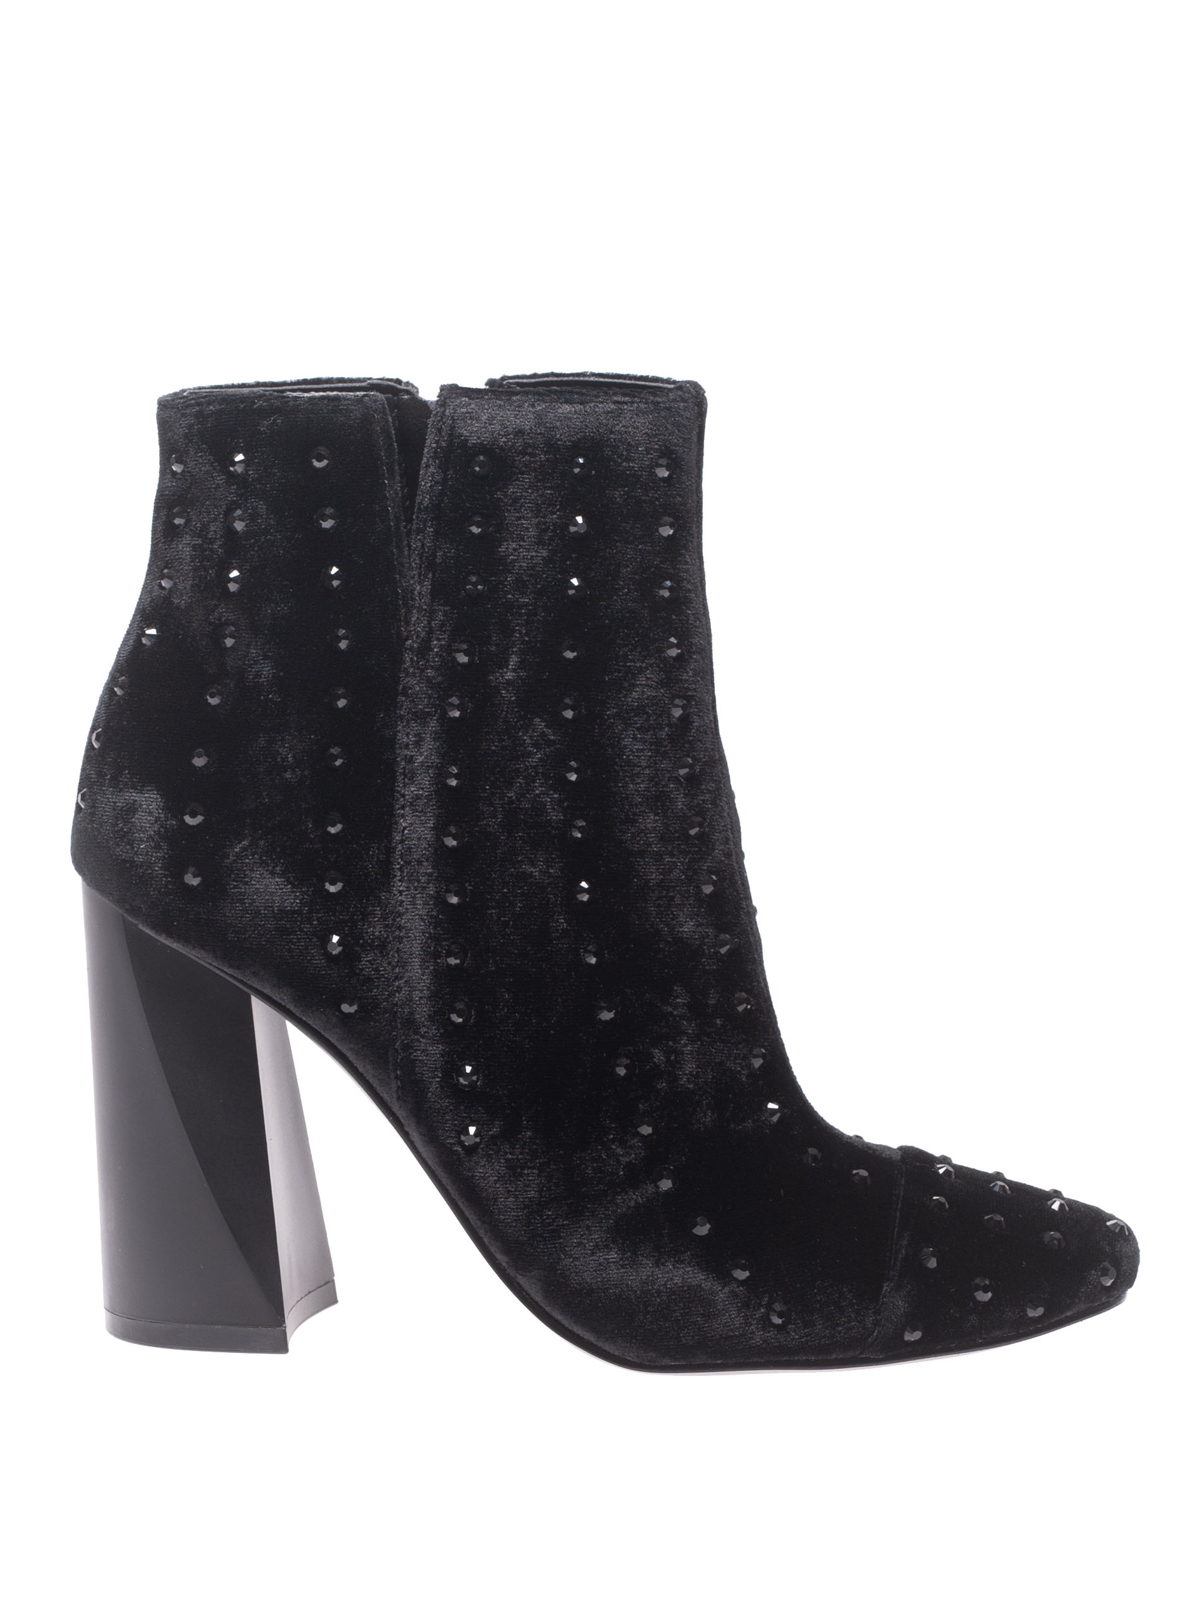 kendall and kylie velvet boots